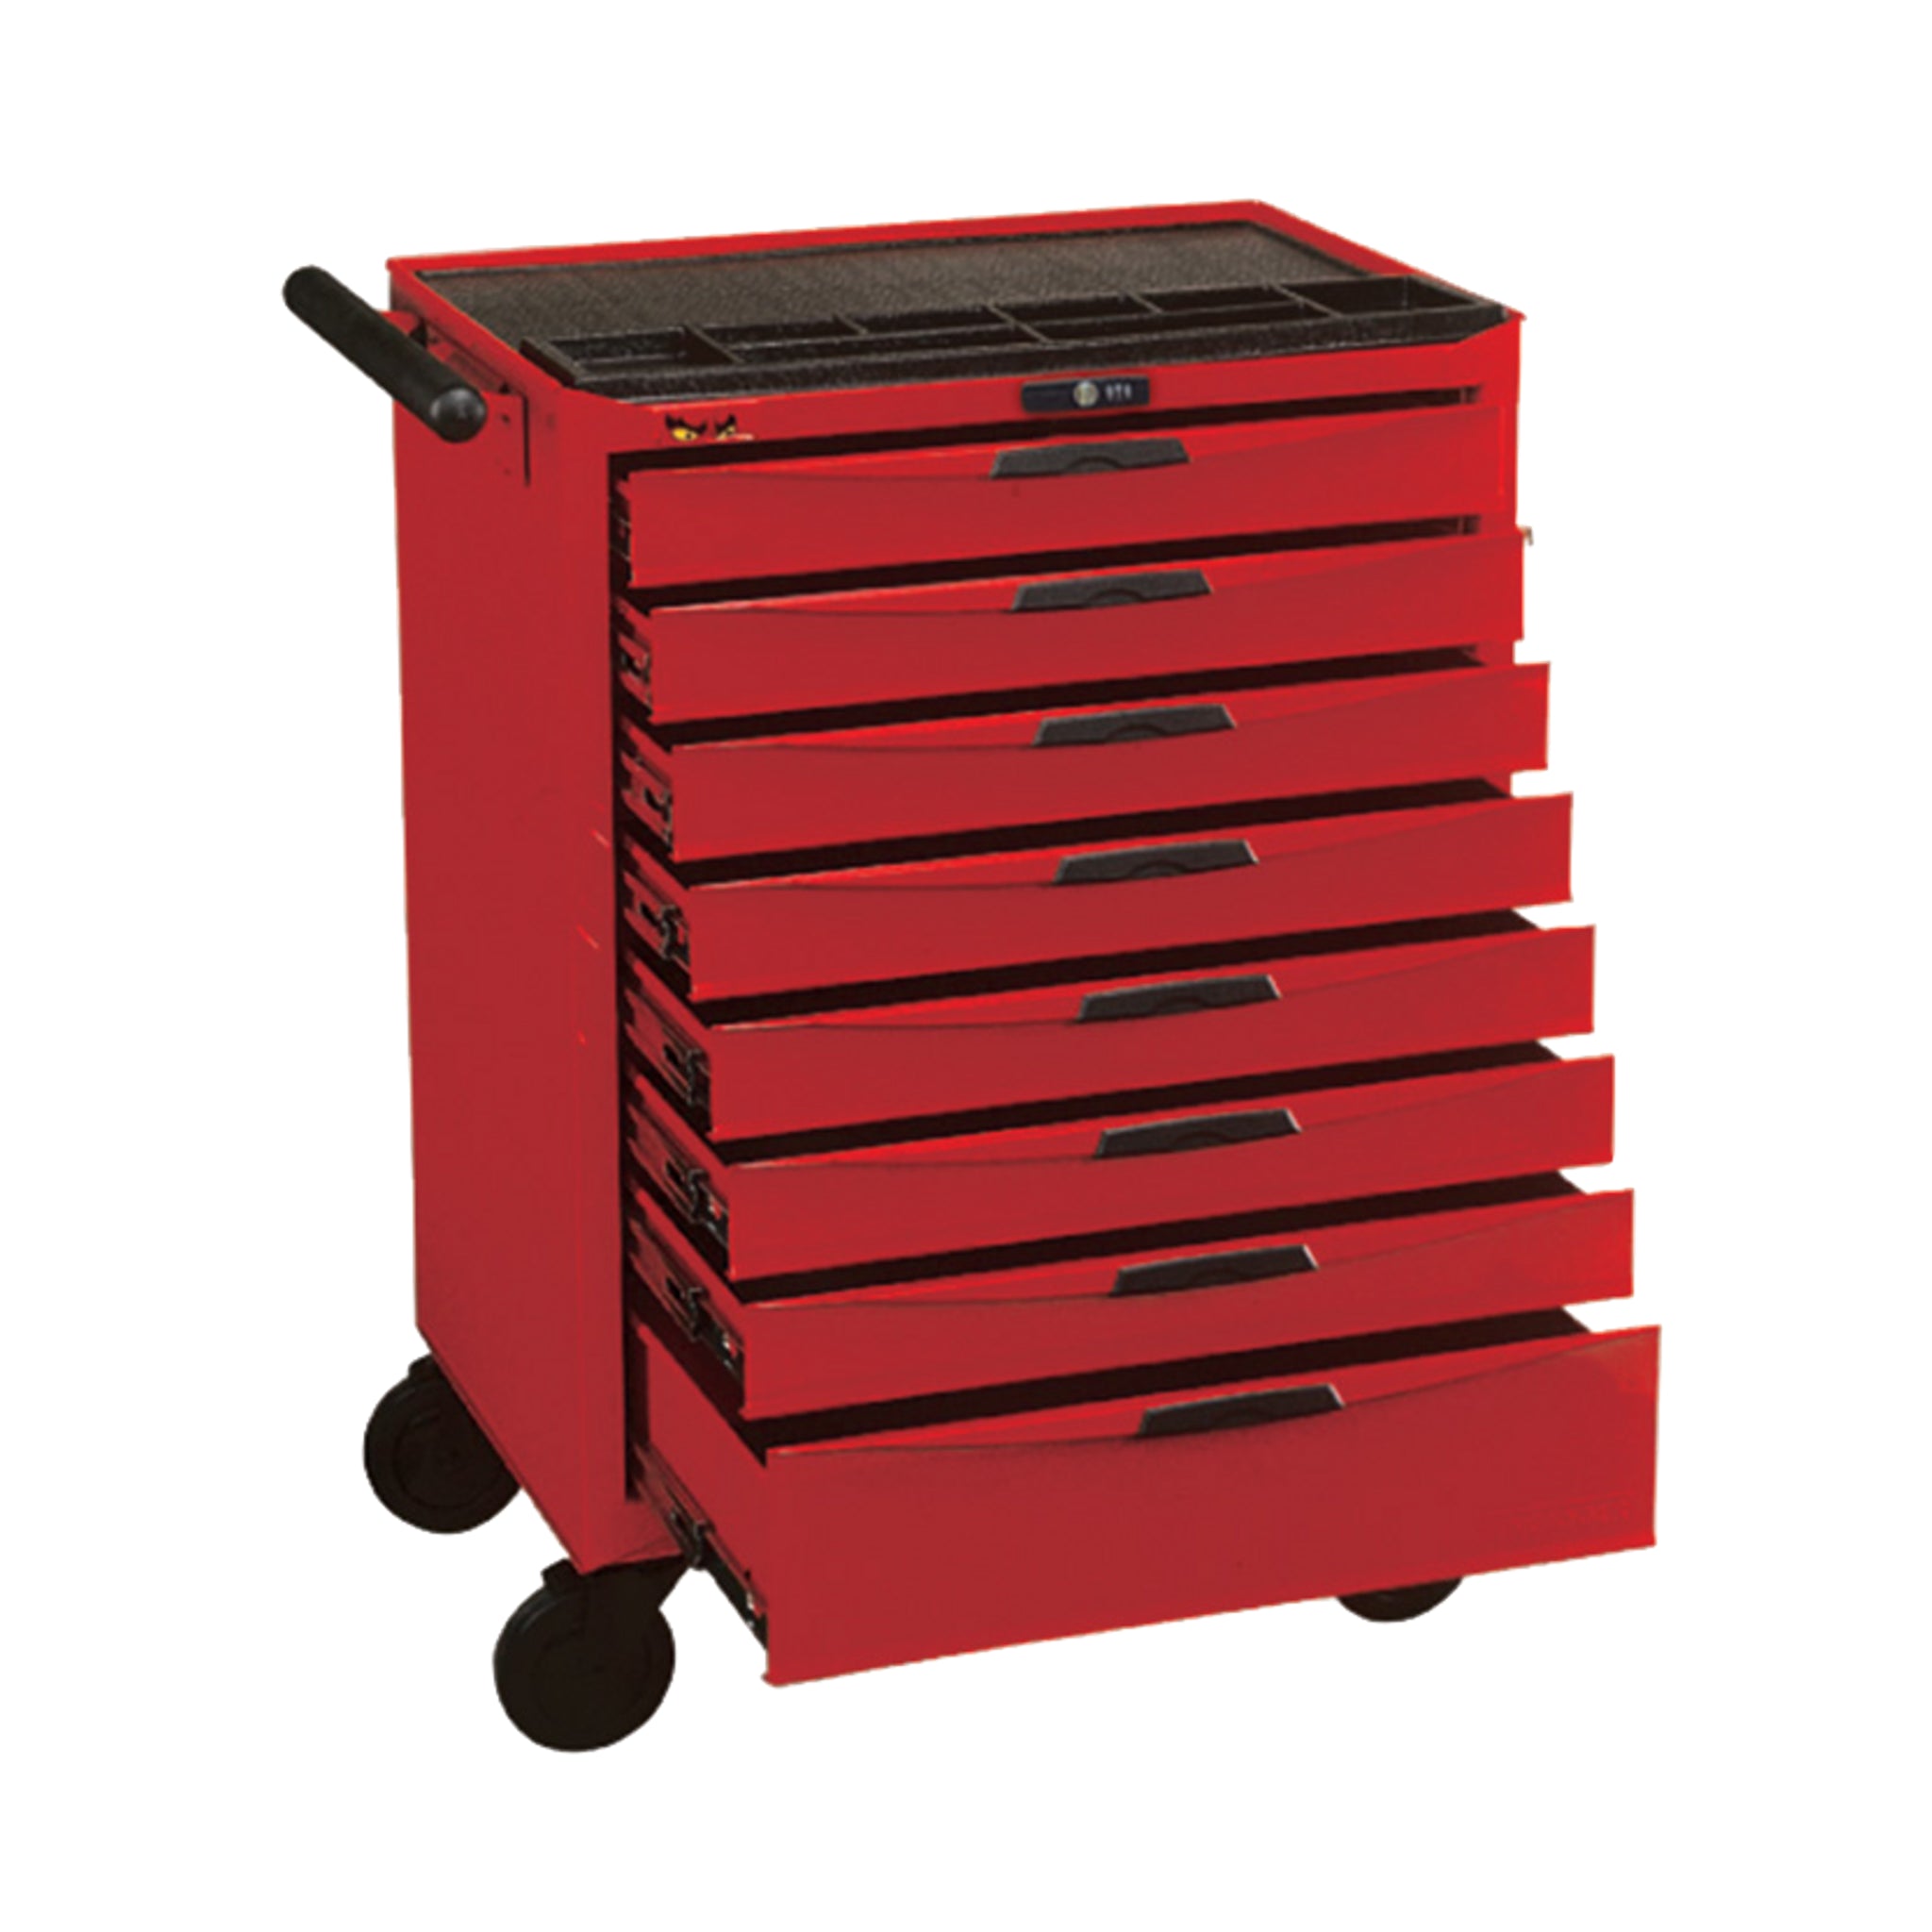 Teng Tools 8 Drawer Heavy Duty Roller Cabinet Tool Chest / Wagon - TCW808N